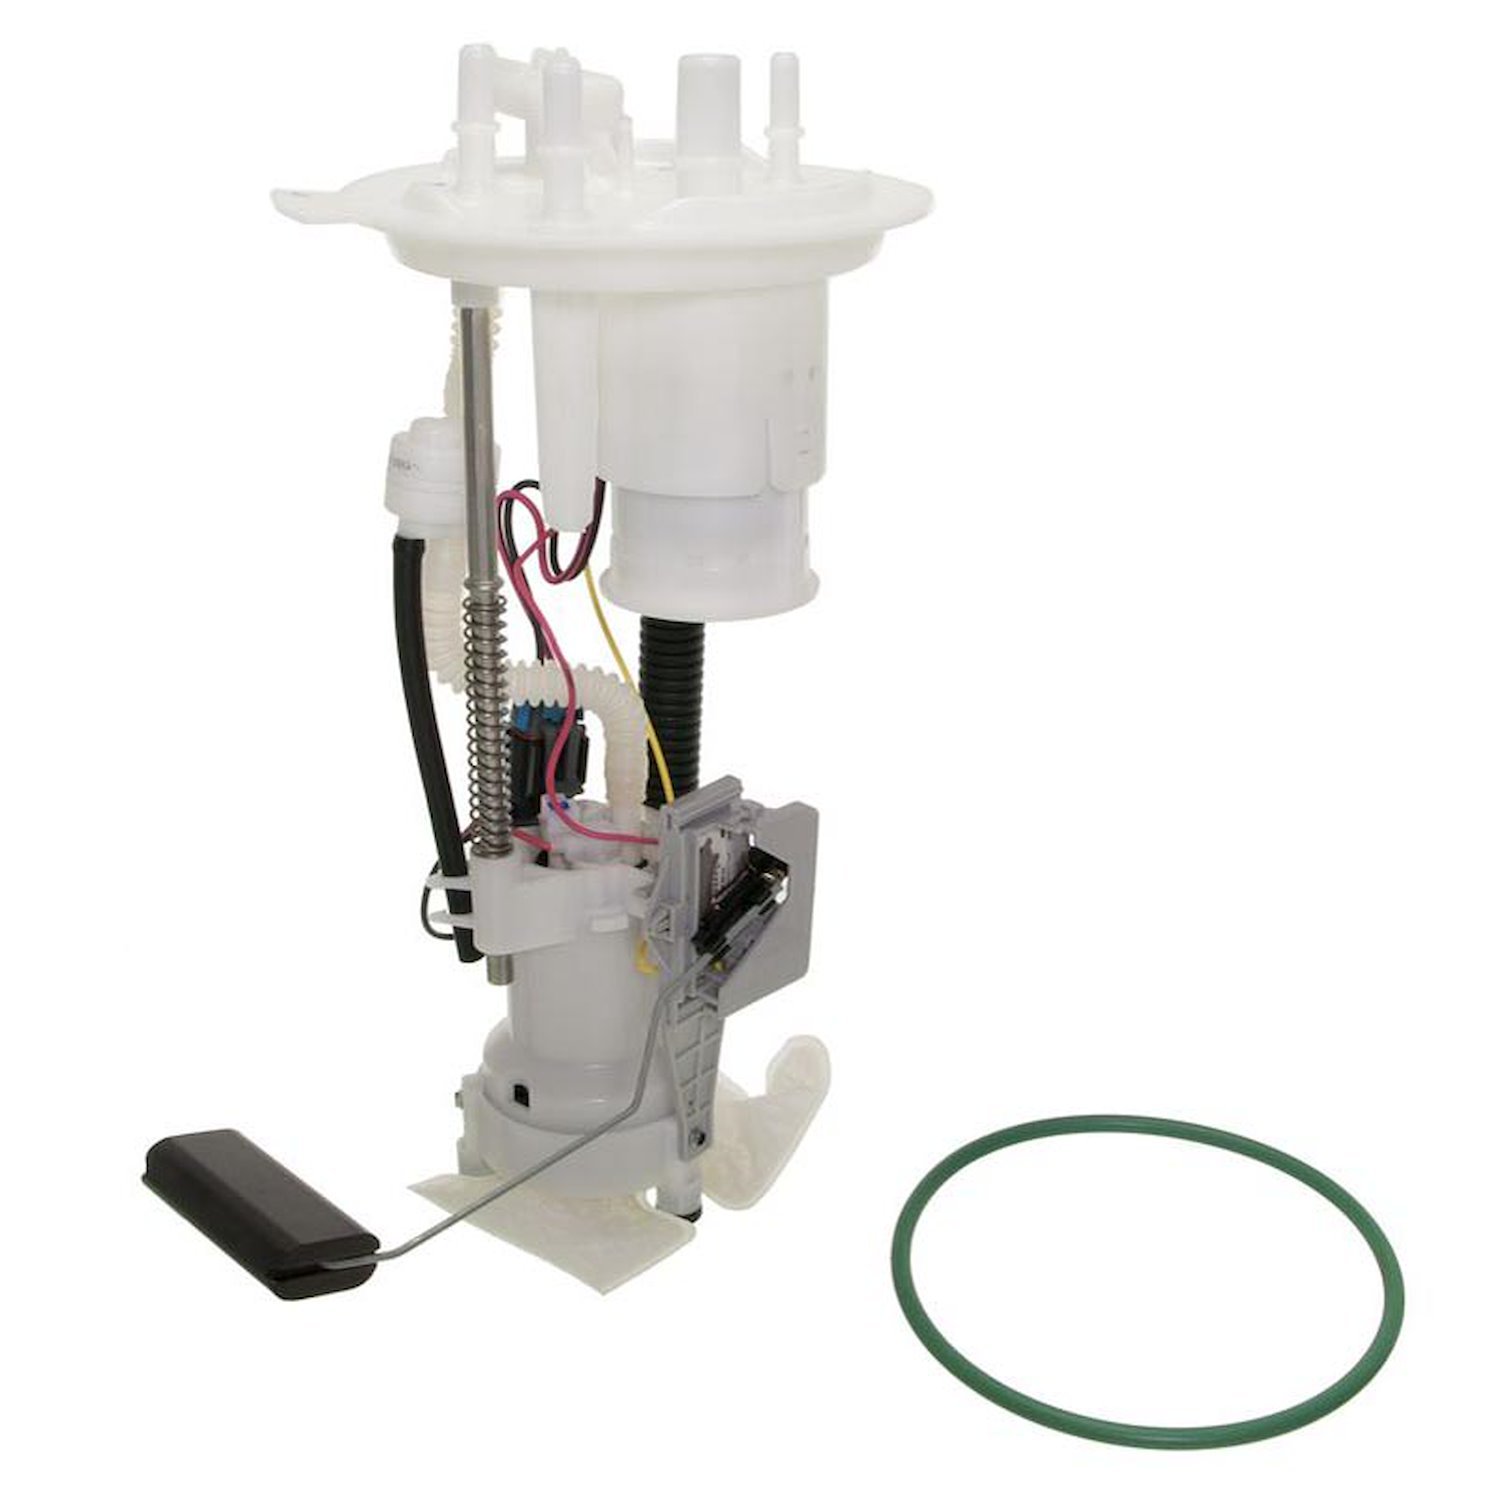 OE Ford Replacement Replacement Fuel Pump Module Assembly for 2006-2008 Ford F-150